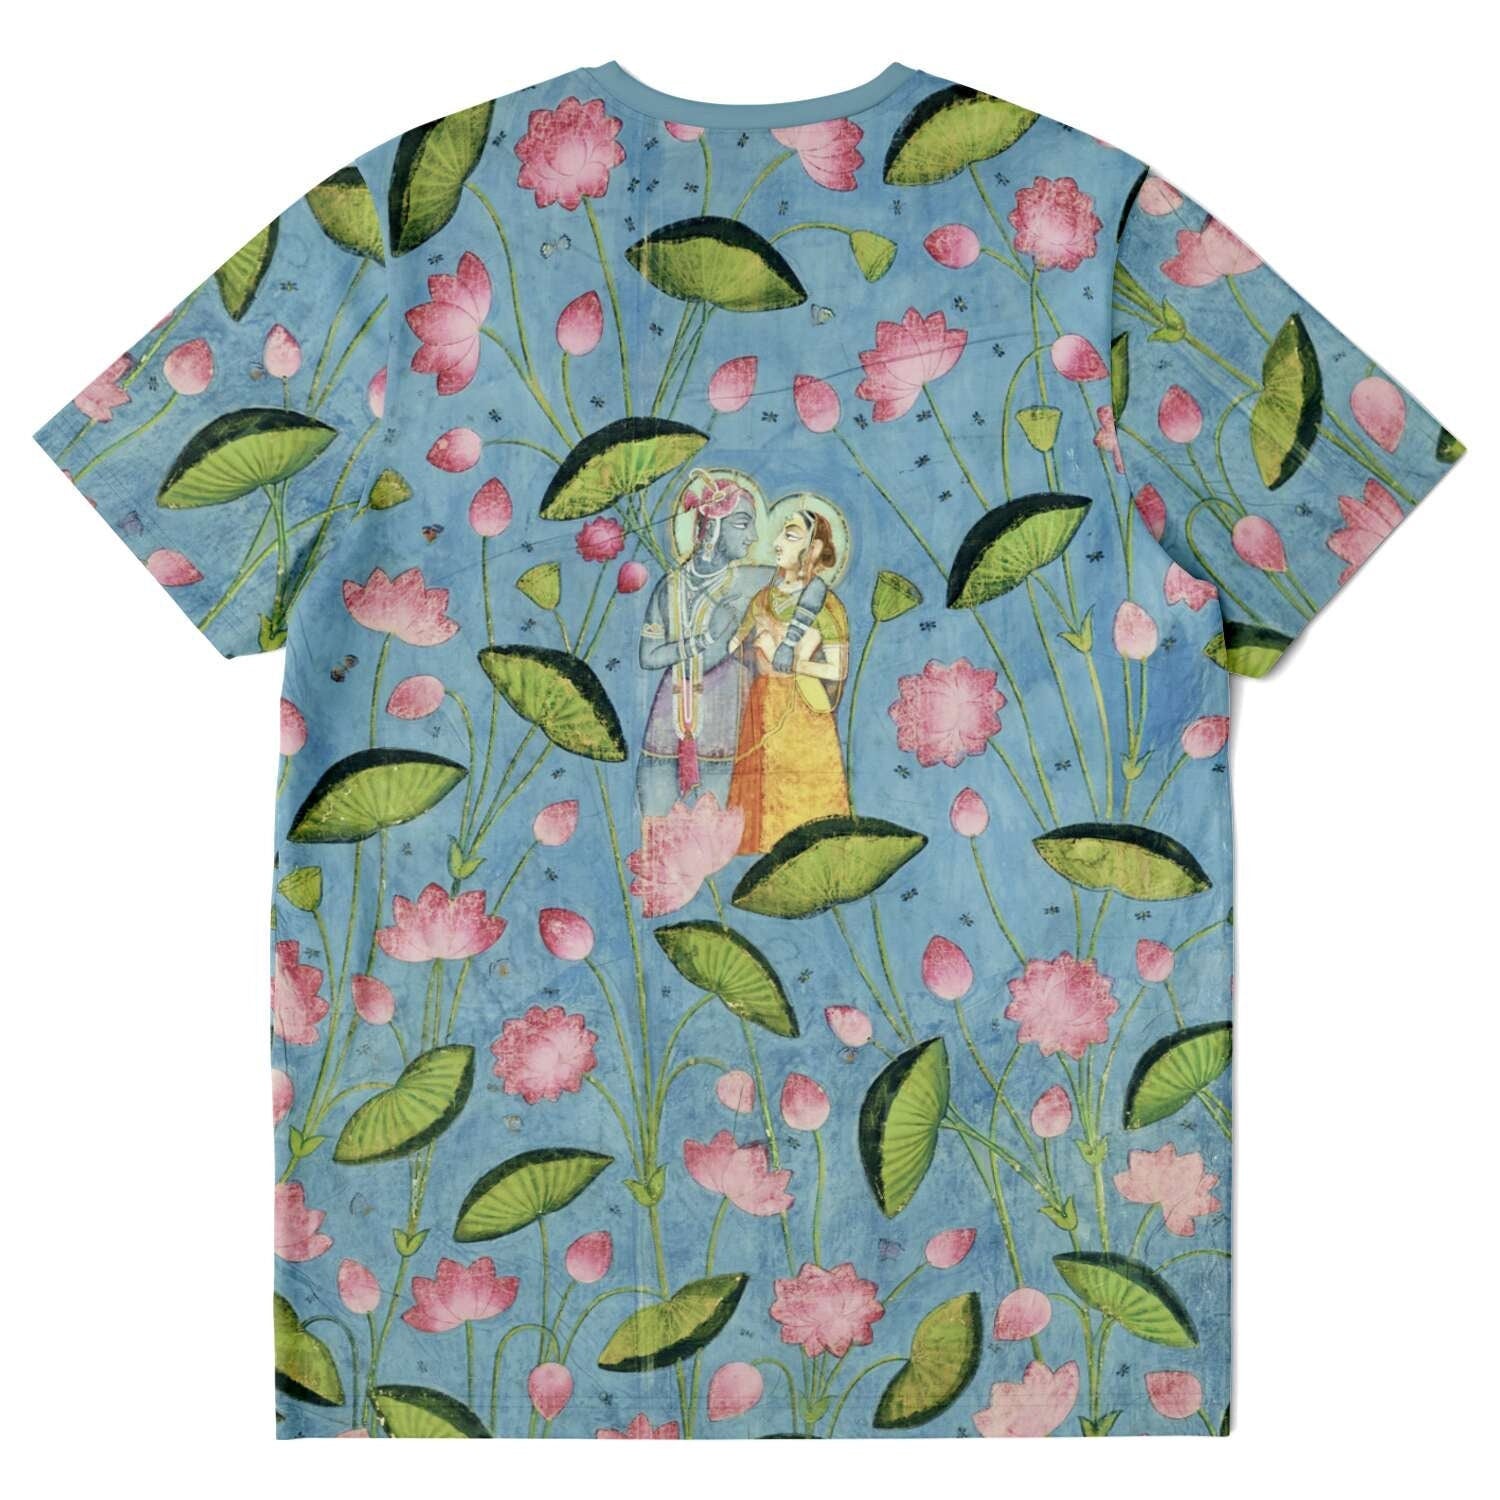 T-shirt Krishna and Radha Among Lotuses | 19th-Century Indian Watercolor | Love, Devotion, Compassion | Hindu, Vedic Vintage Graphic T-Shirt Tee